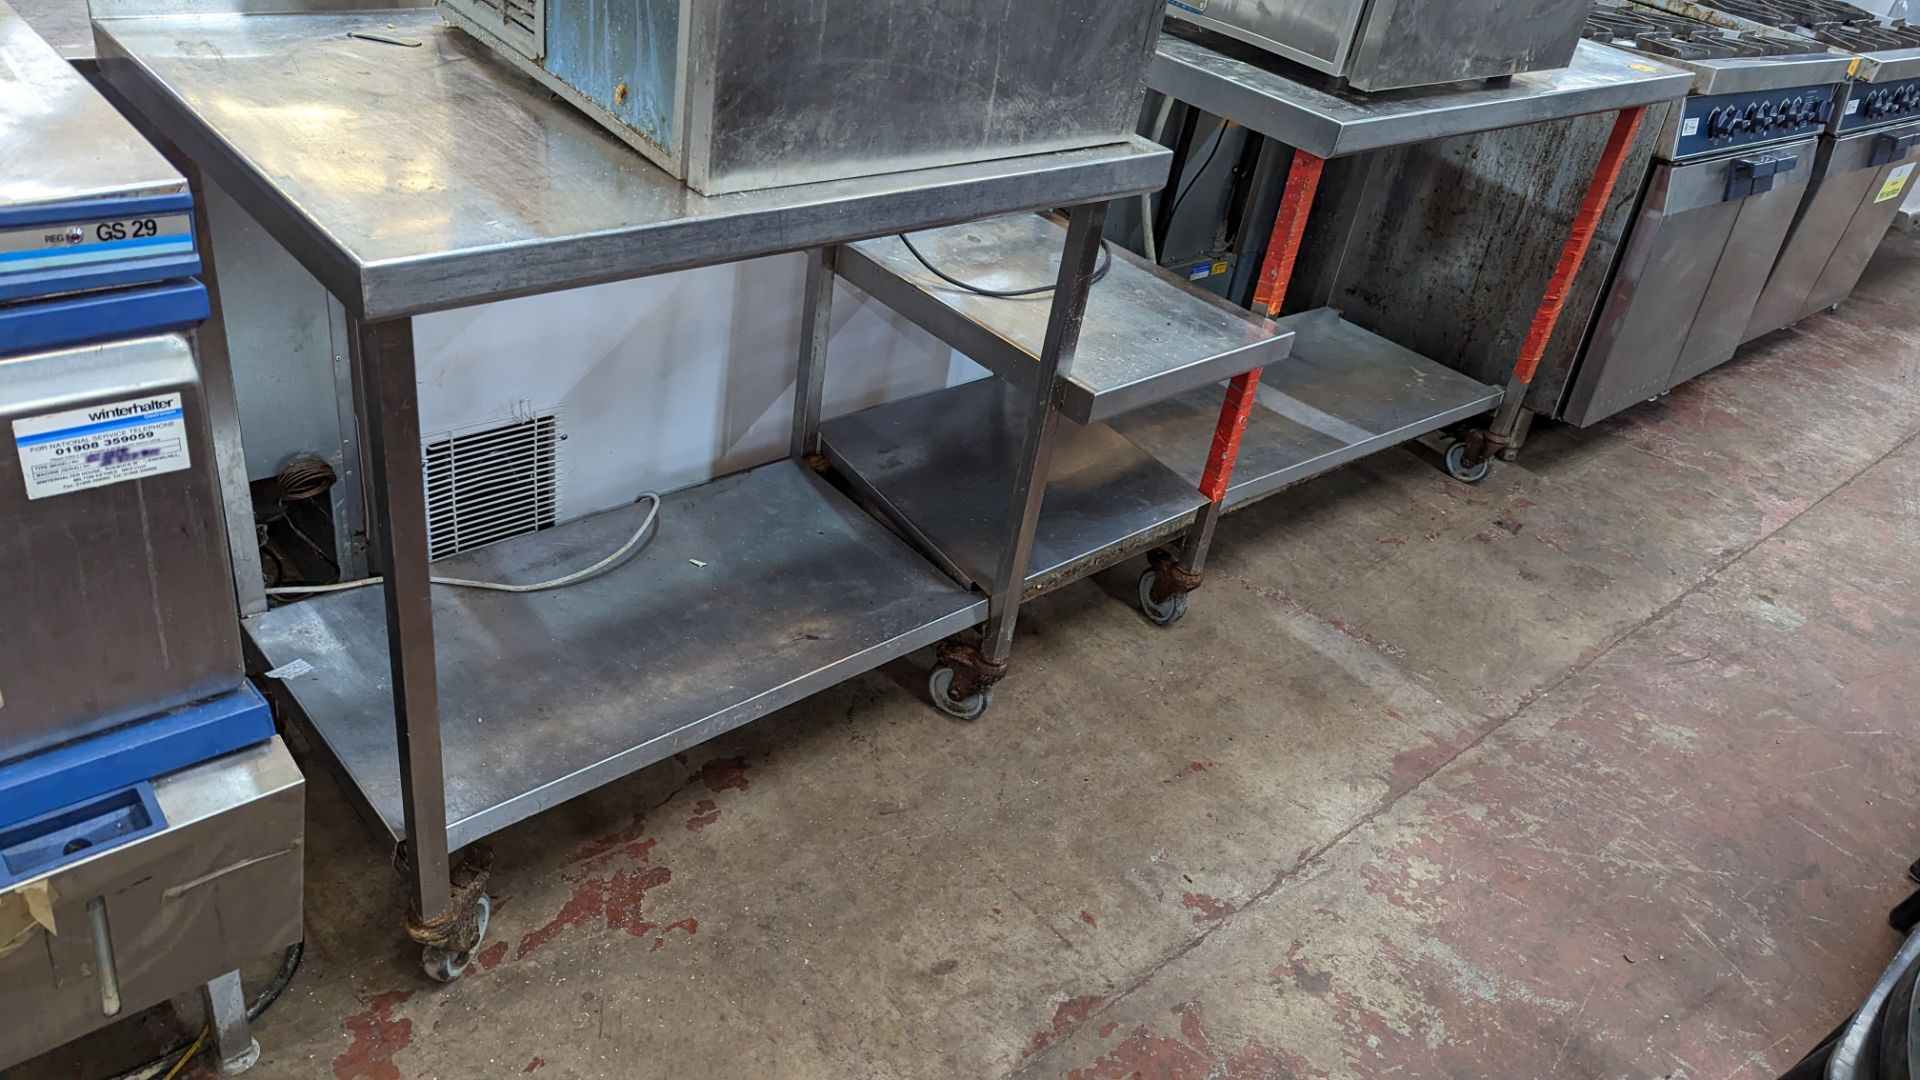 Very large mobile stainless steel multi-tier trolley/shelving unit with max overall dimensions of ap - Image 6 of 6